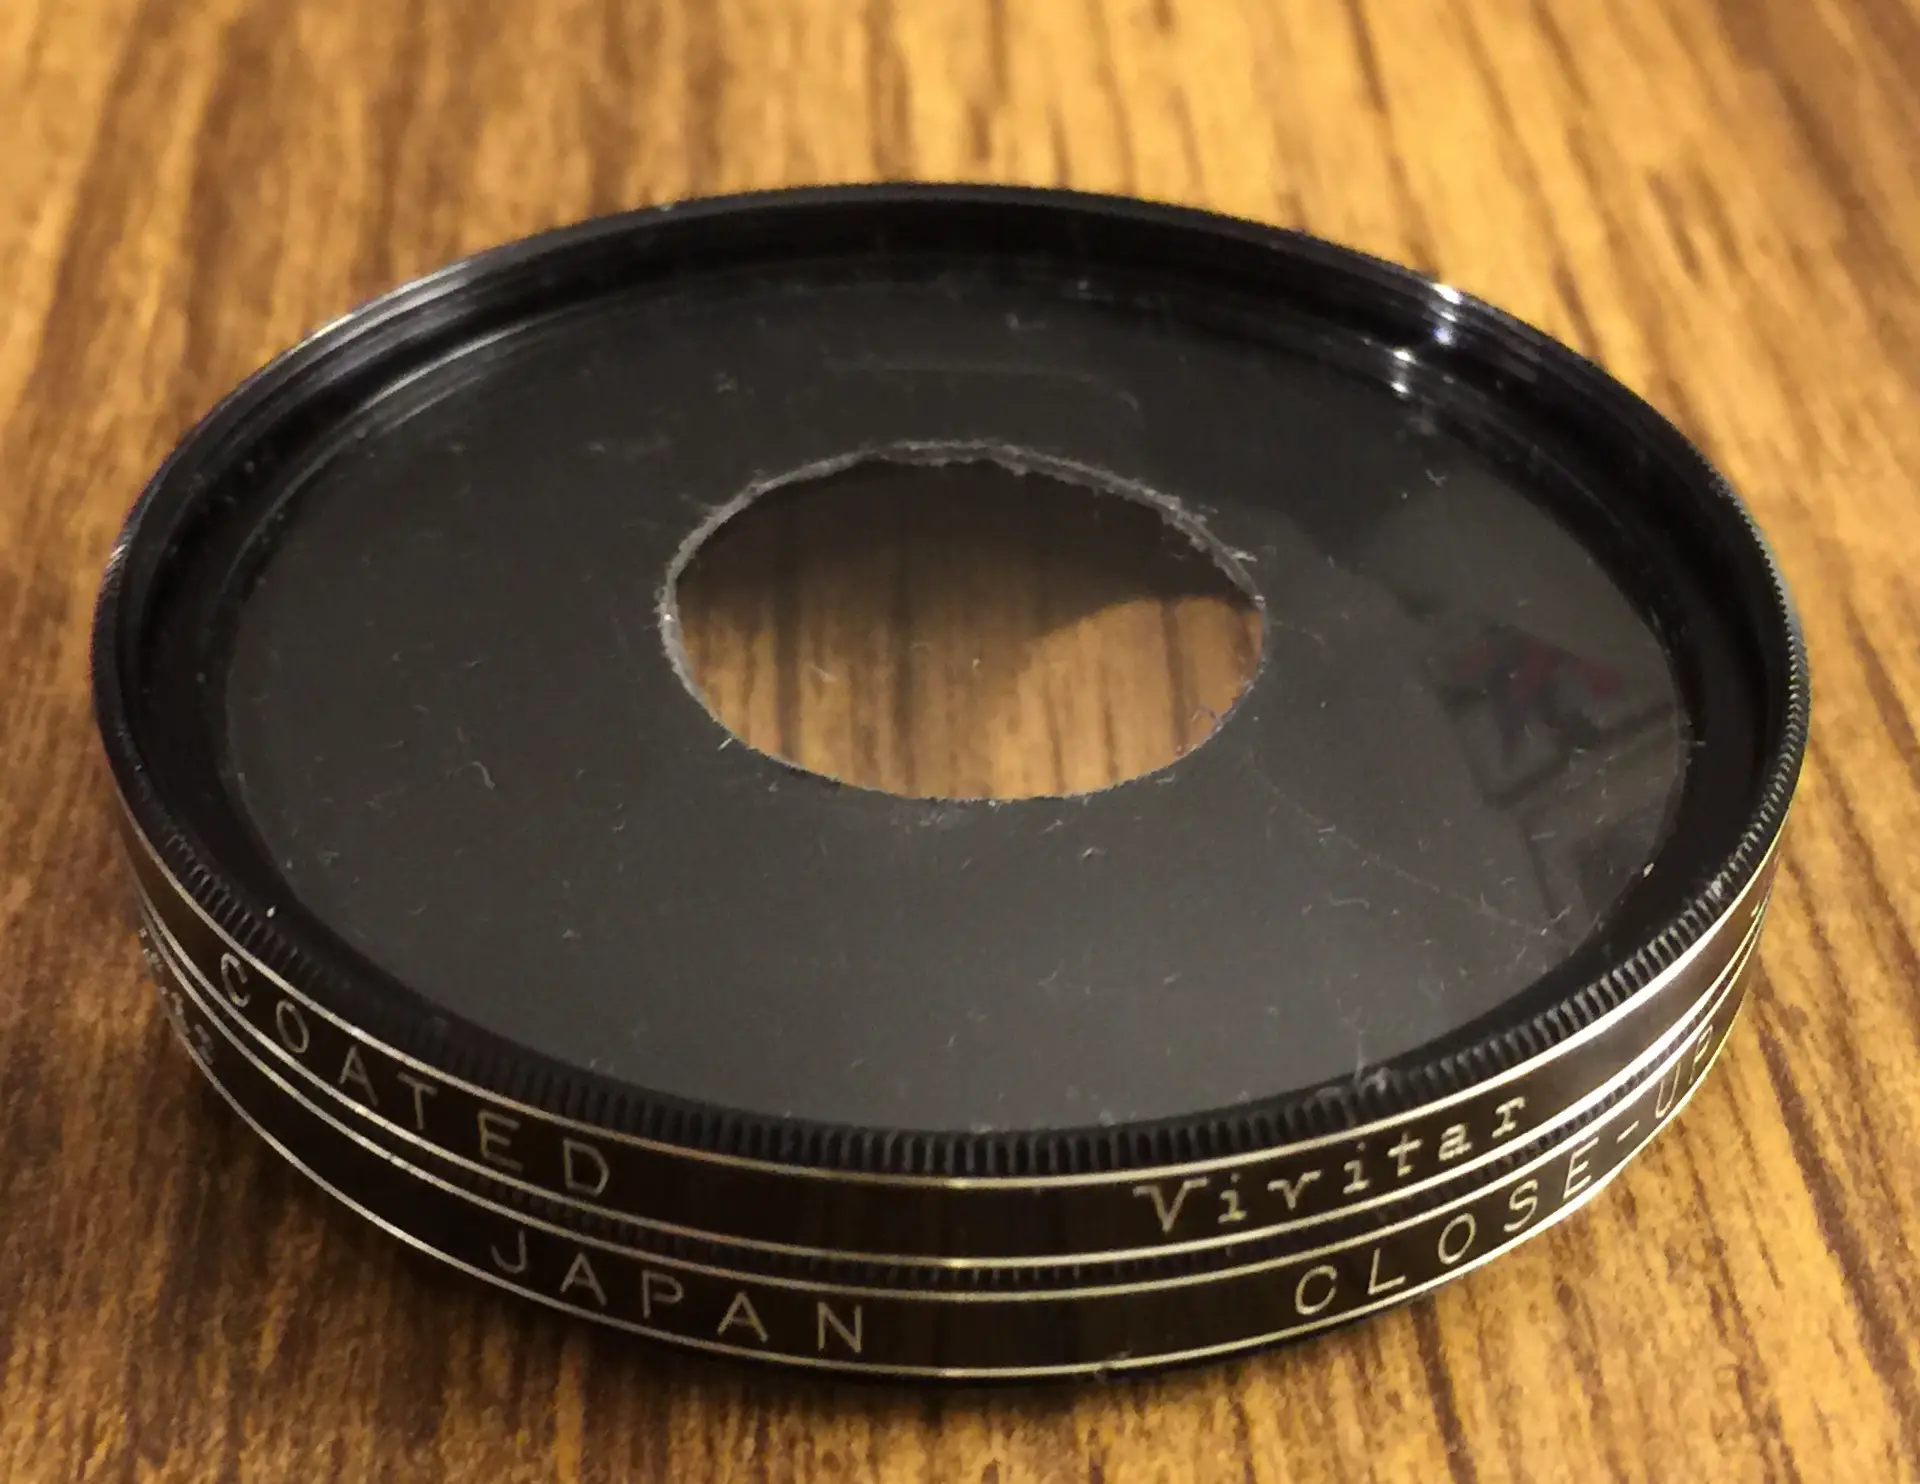 Lens with Waterstop disk inside